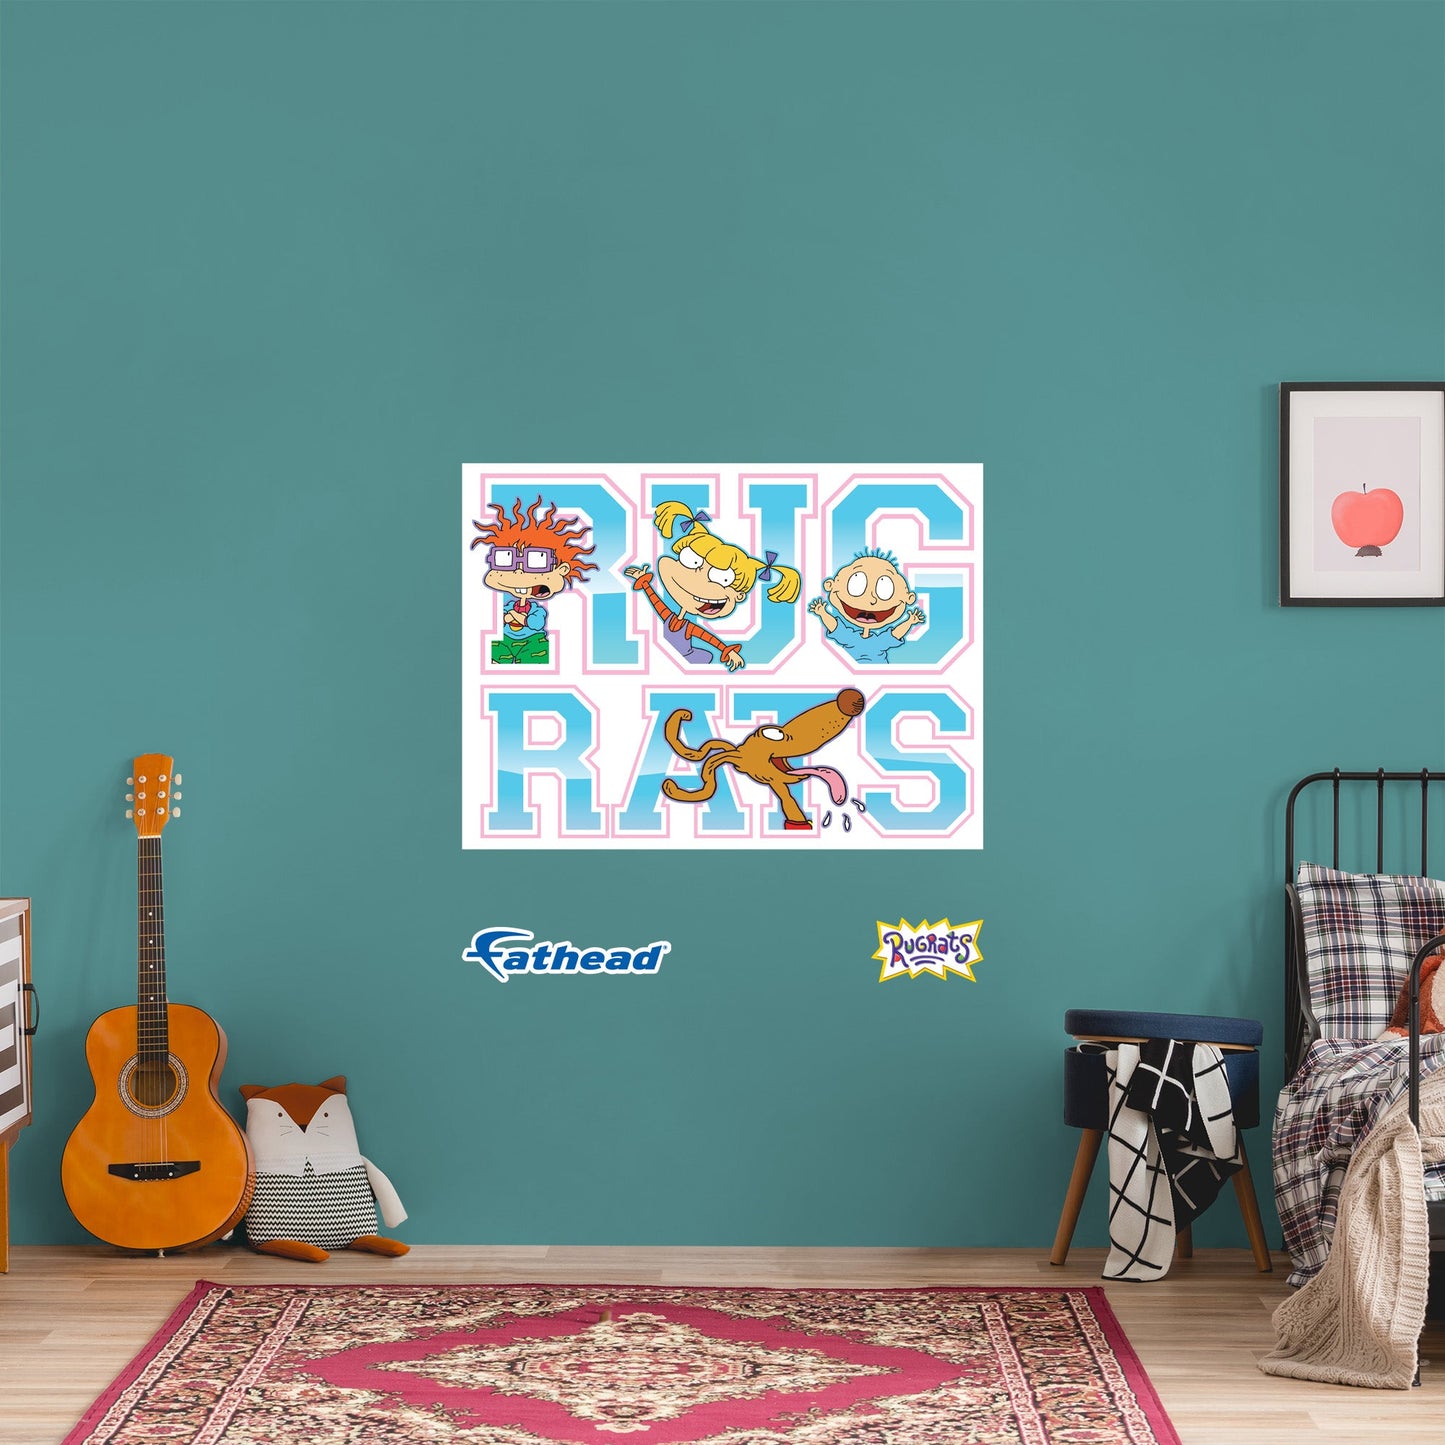 Rugrats: Friends Poster - Officially Licensed Nickelodeon Removable Adhesive Decal